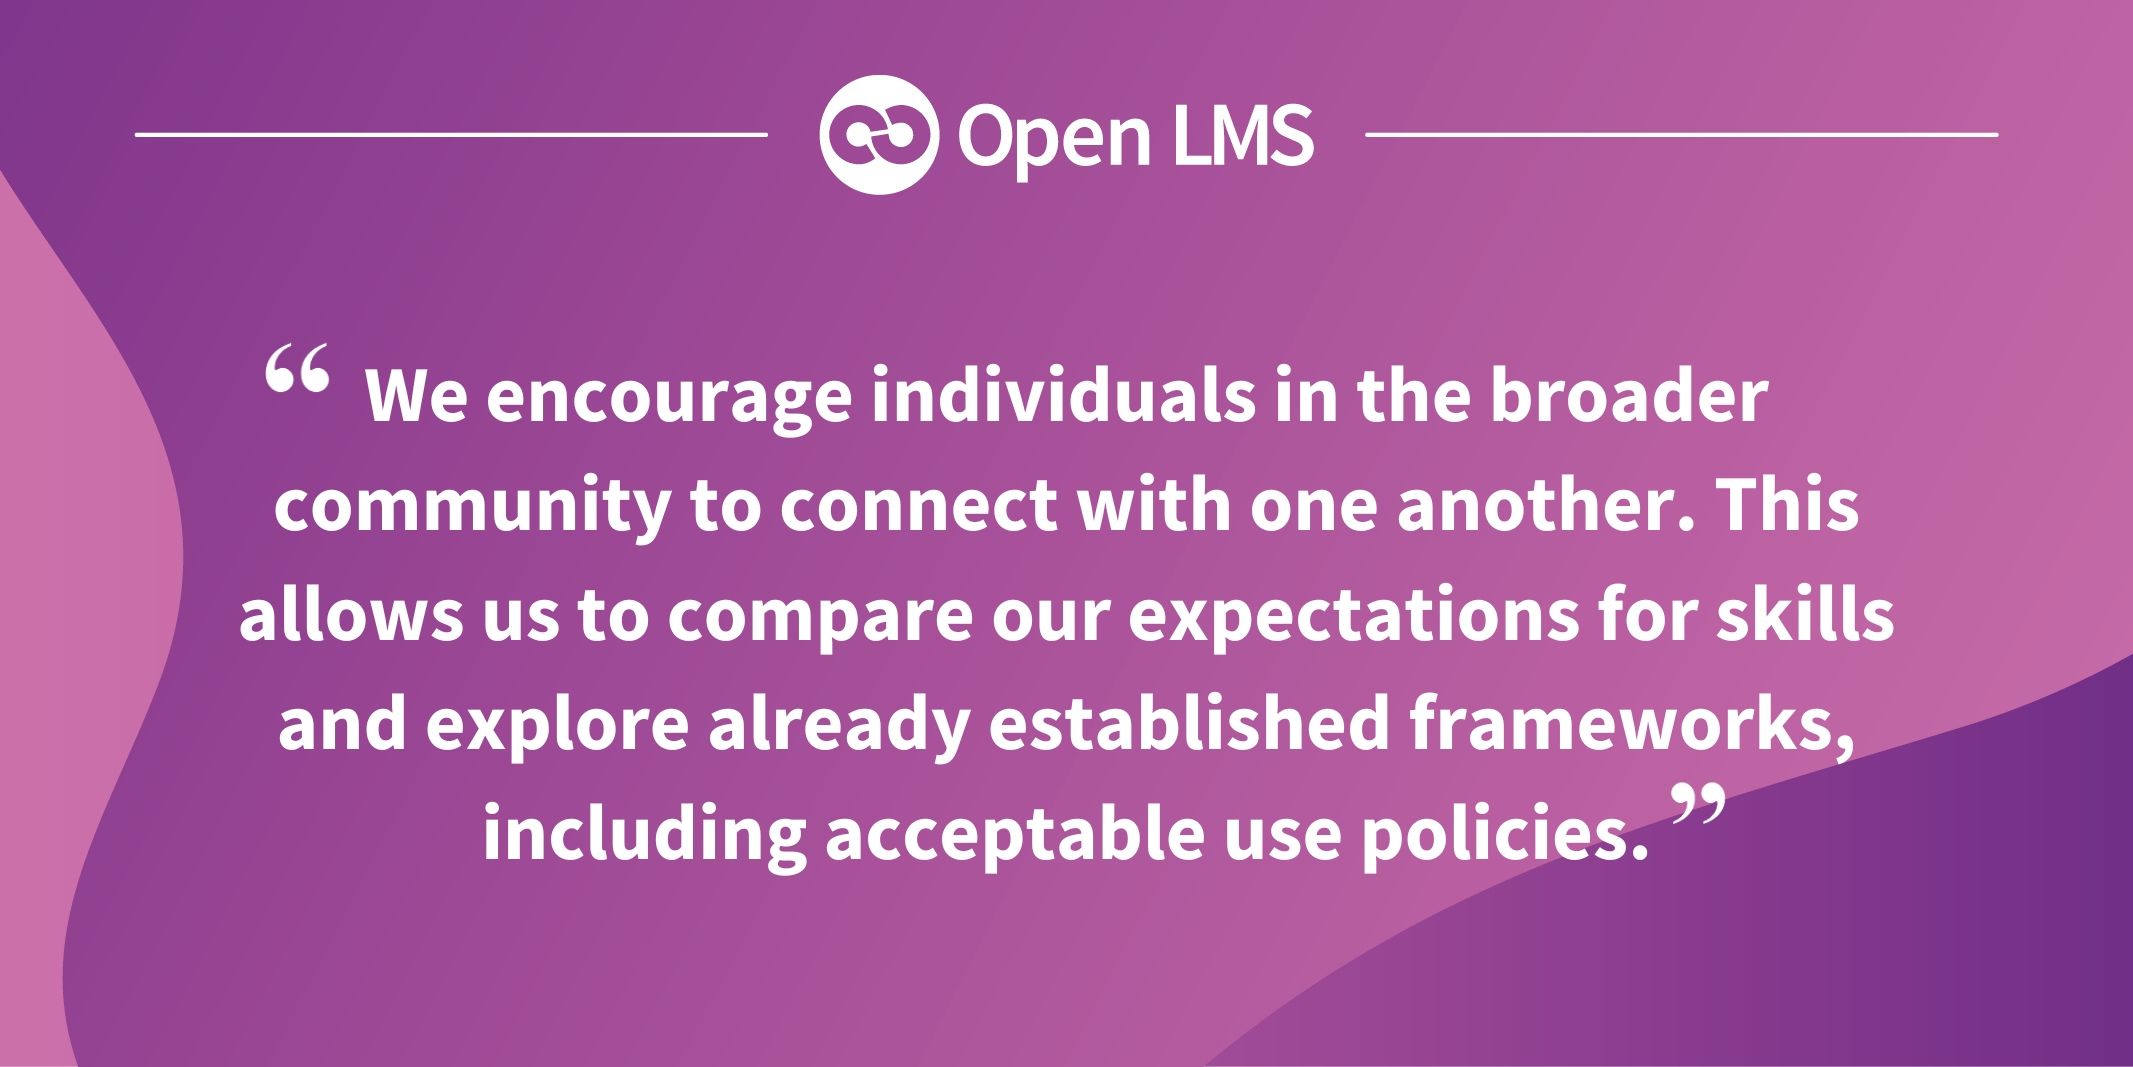 We encourage individuals in the broader community to connect with one another. This allows us to compare our expectations for skills and explore already established frameworks, including acceptable use policies